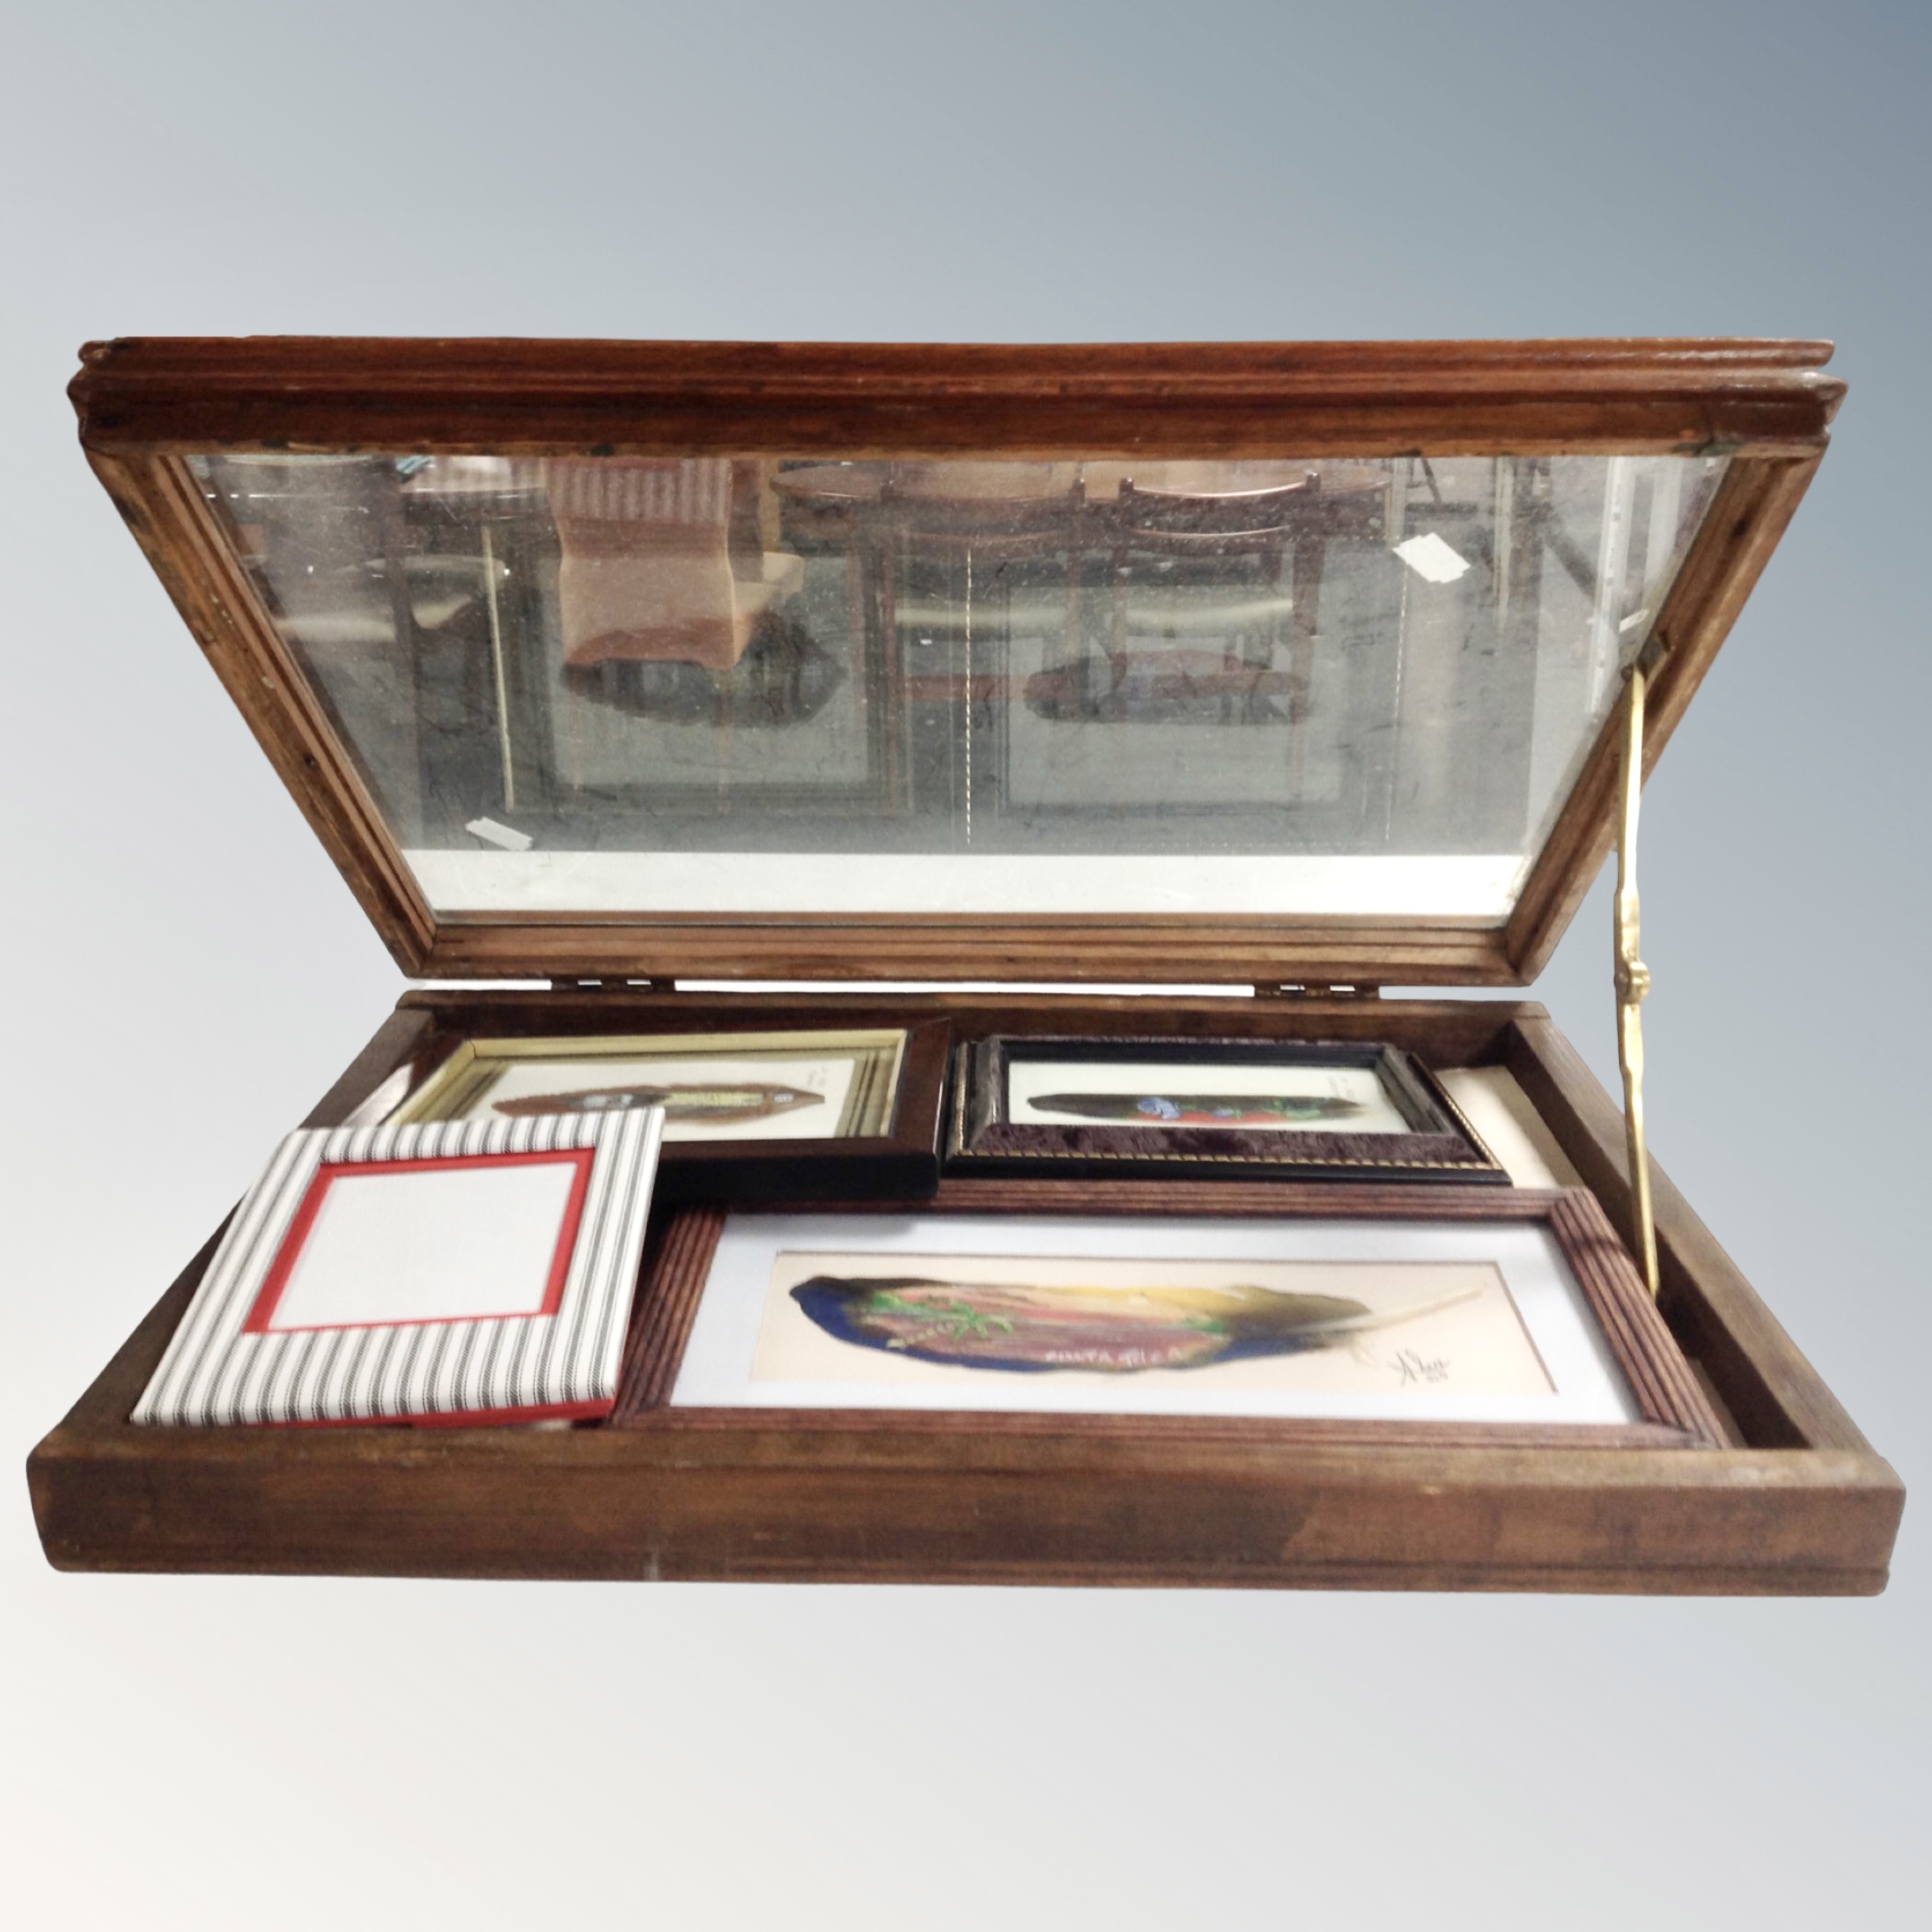 A glazed mahogany tabletop cabinet containing hand painted feathers, tourist items in cases etc.